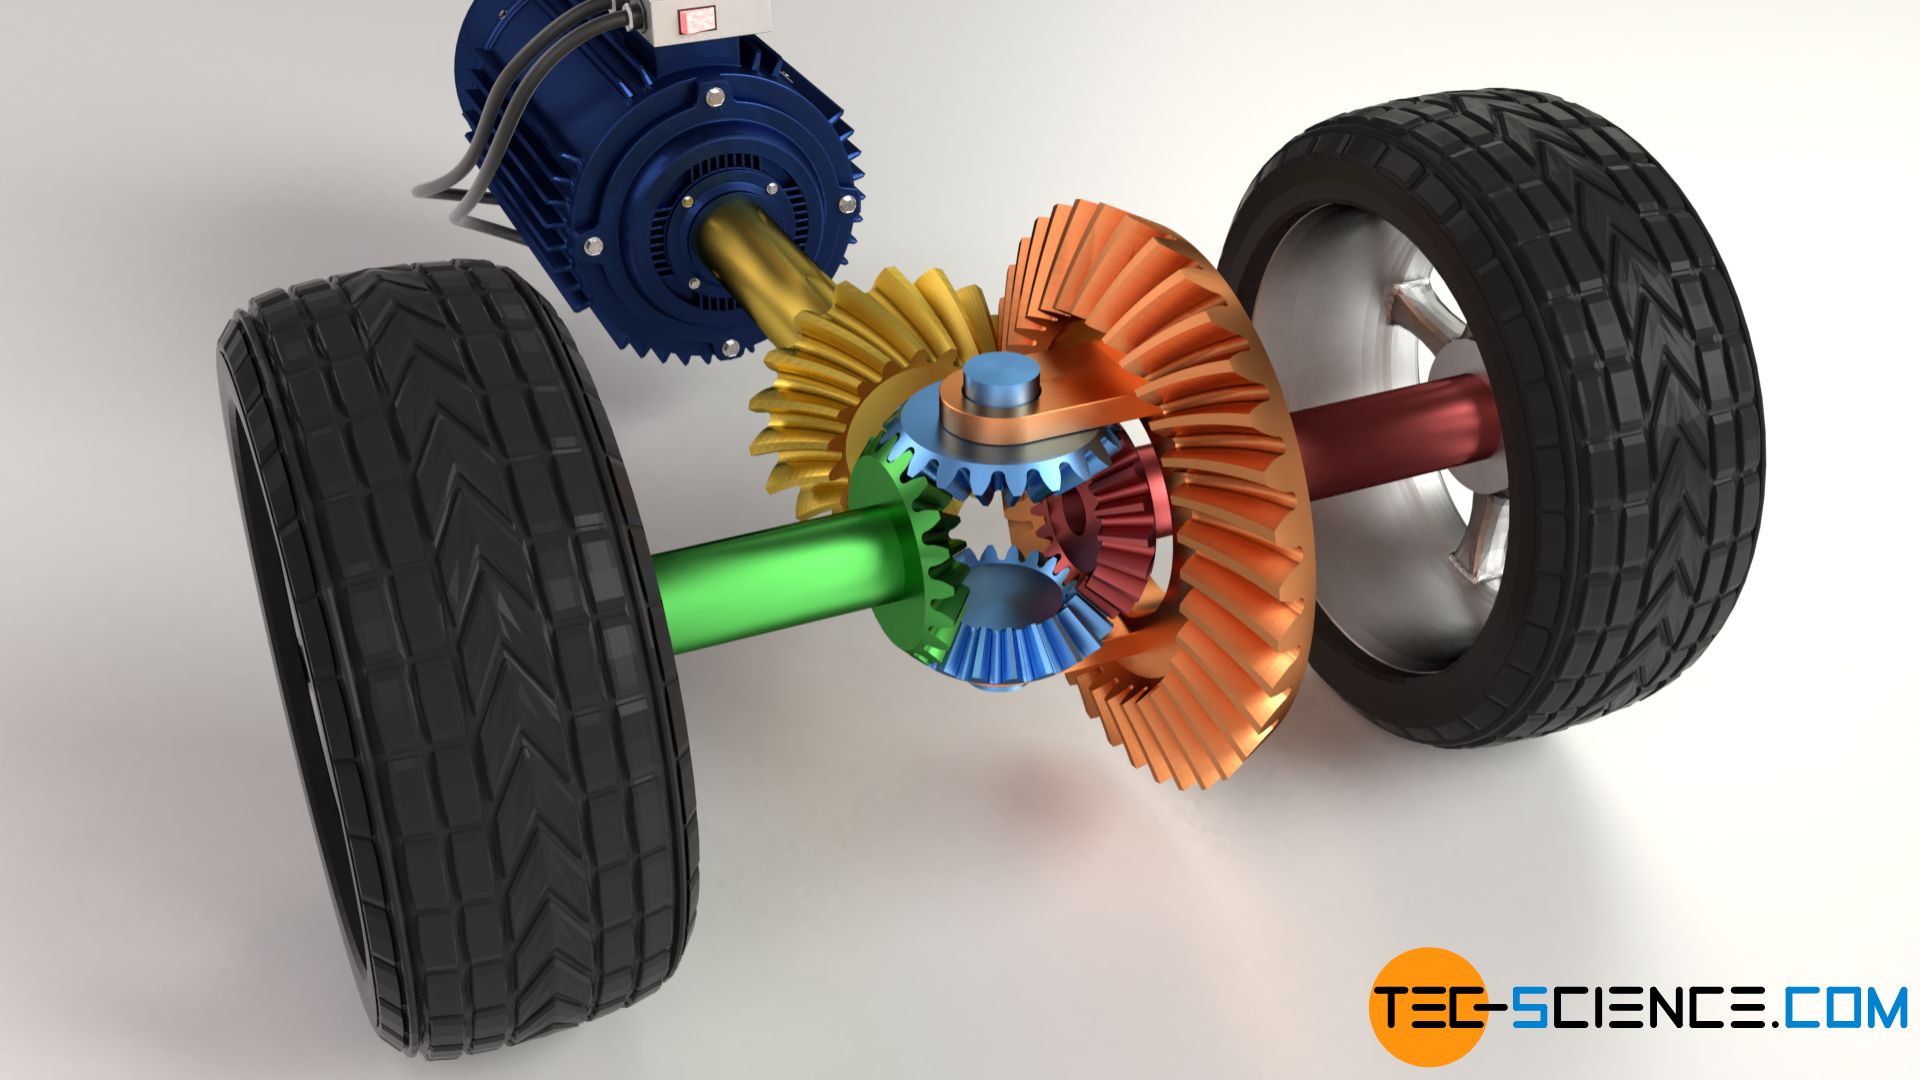 How Gears Work - Different Types of Gears, their Functions, gears